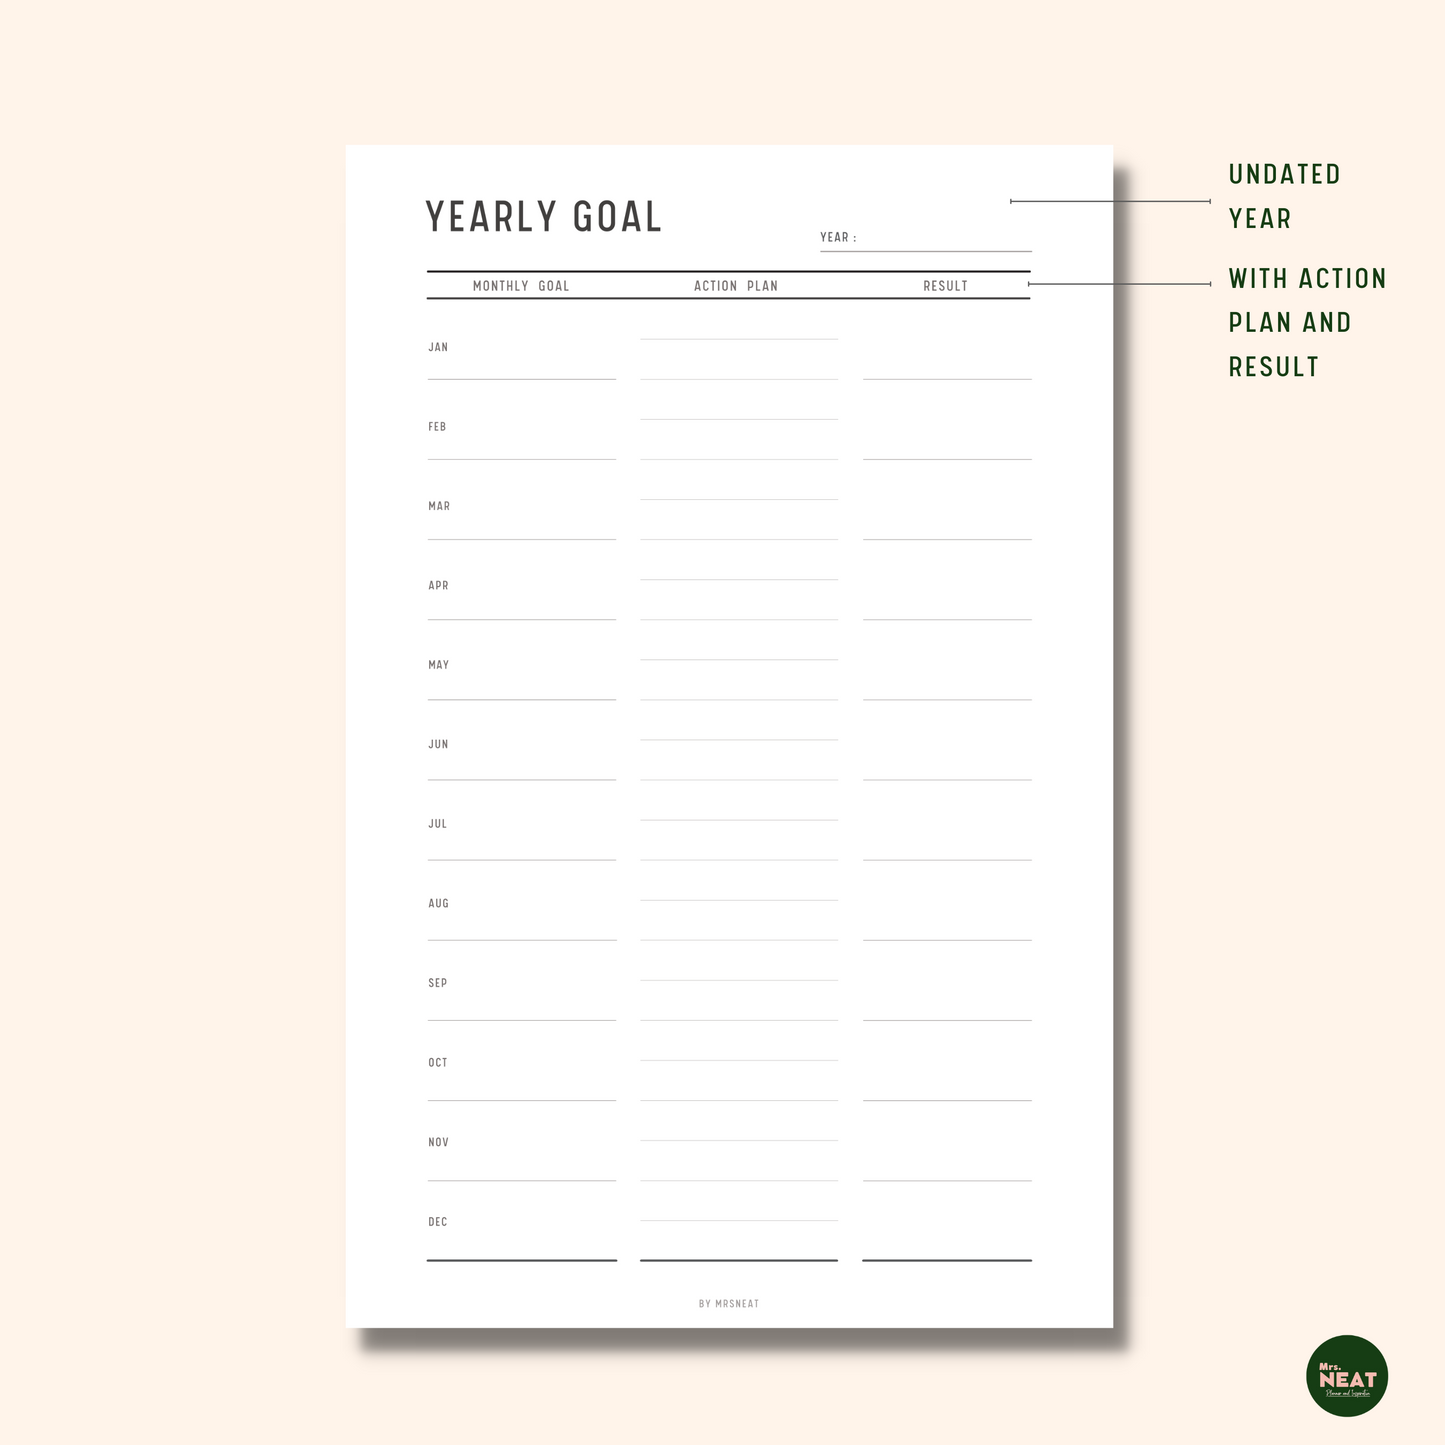 Minimalist and Clean Yearly Goal Planner with room for action plan and results for 12 months